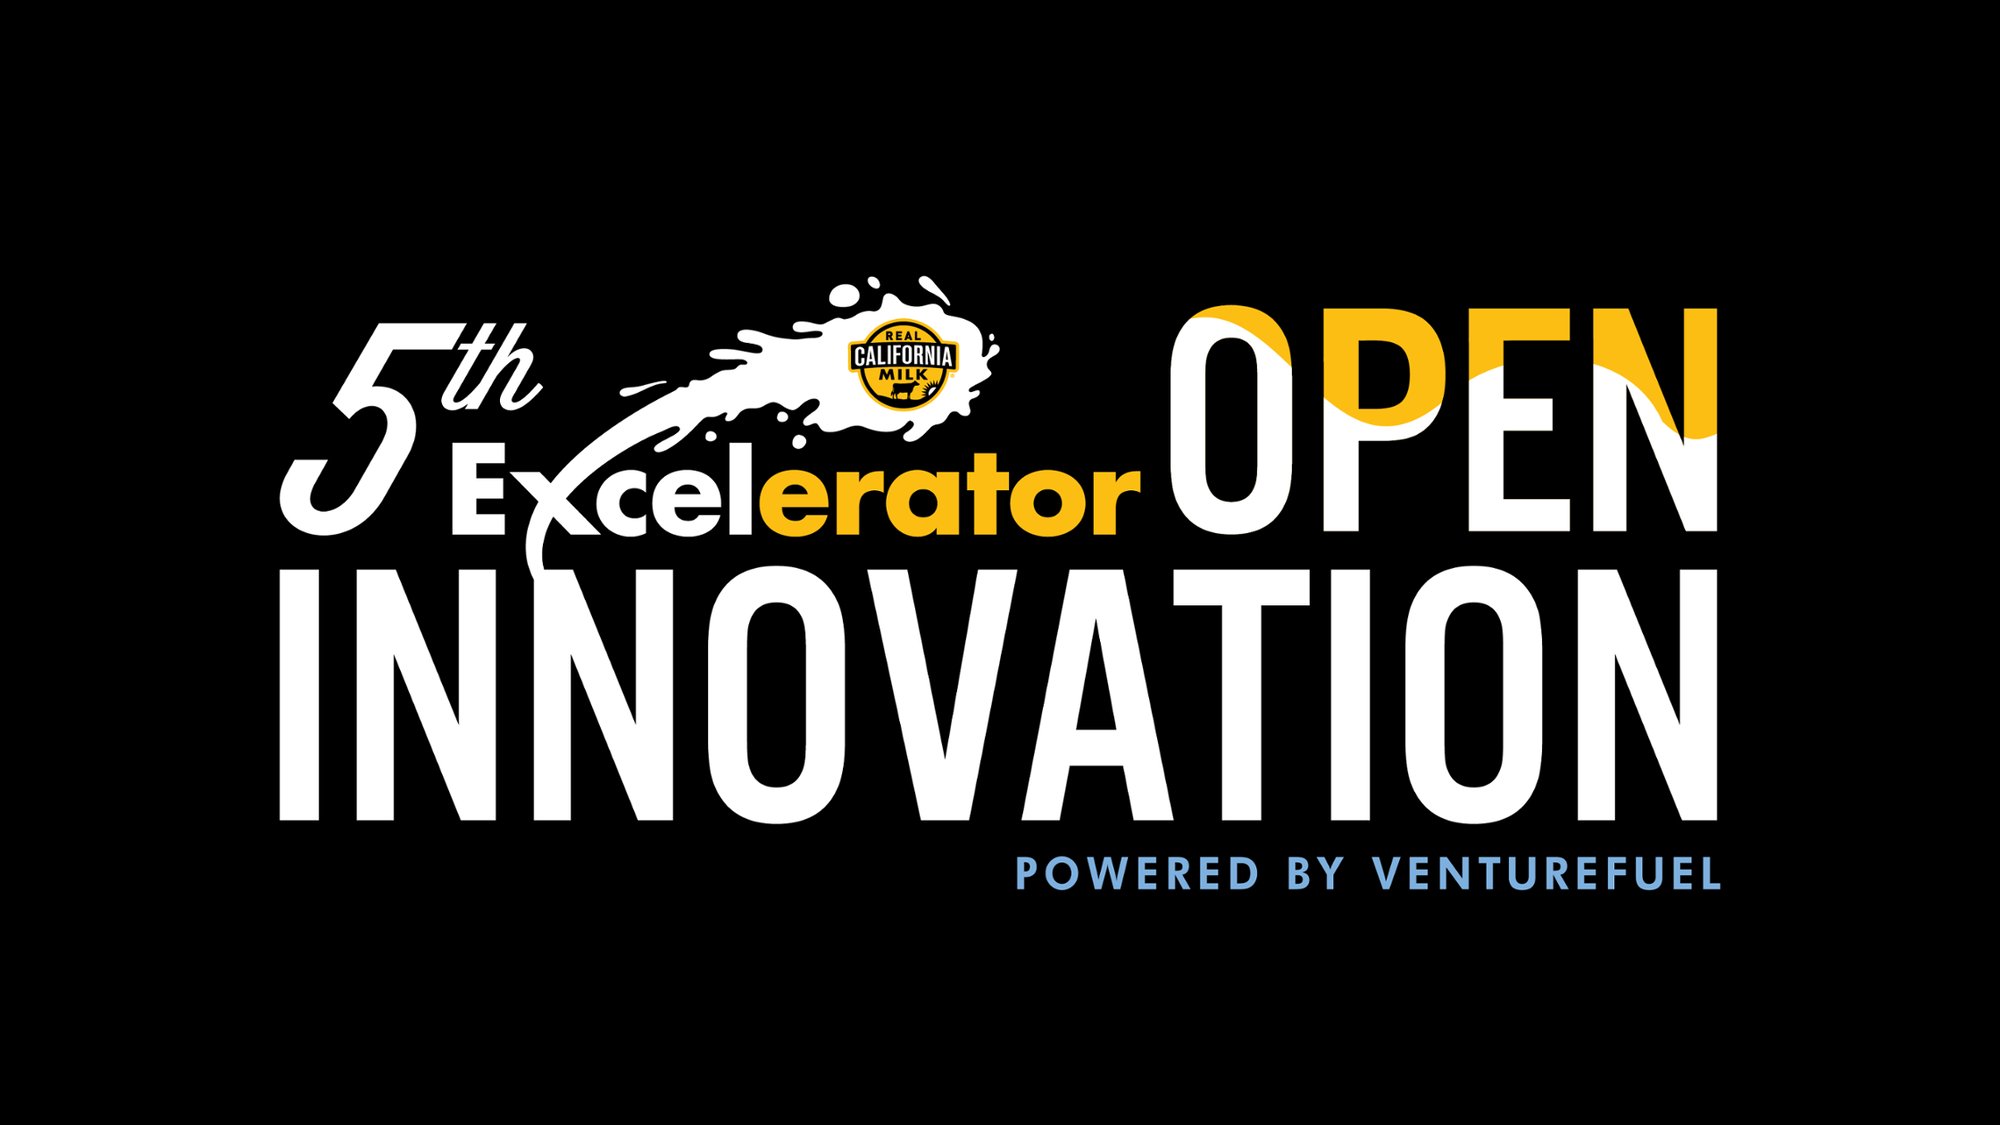 Real California Milk Excelerator Cohort Announced, Eight Dairy Startups Compete in 5th Annual Dairy Innovation Competition